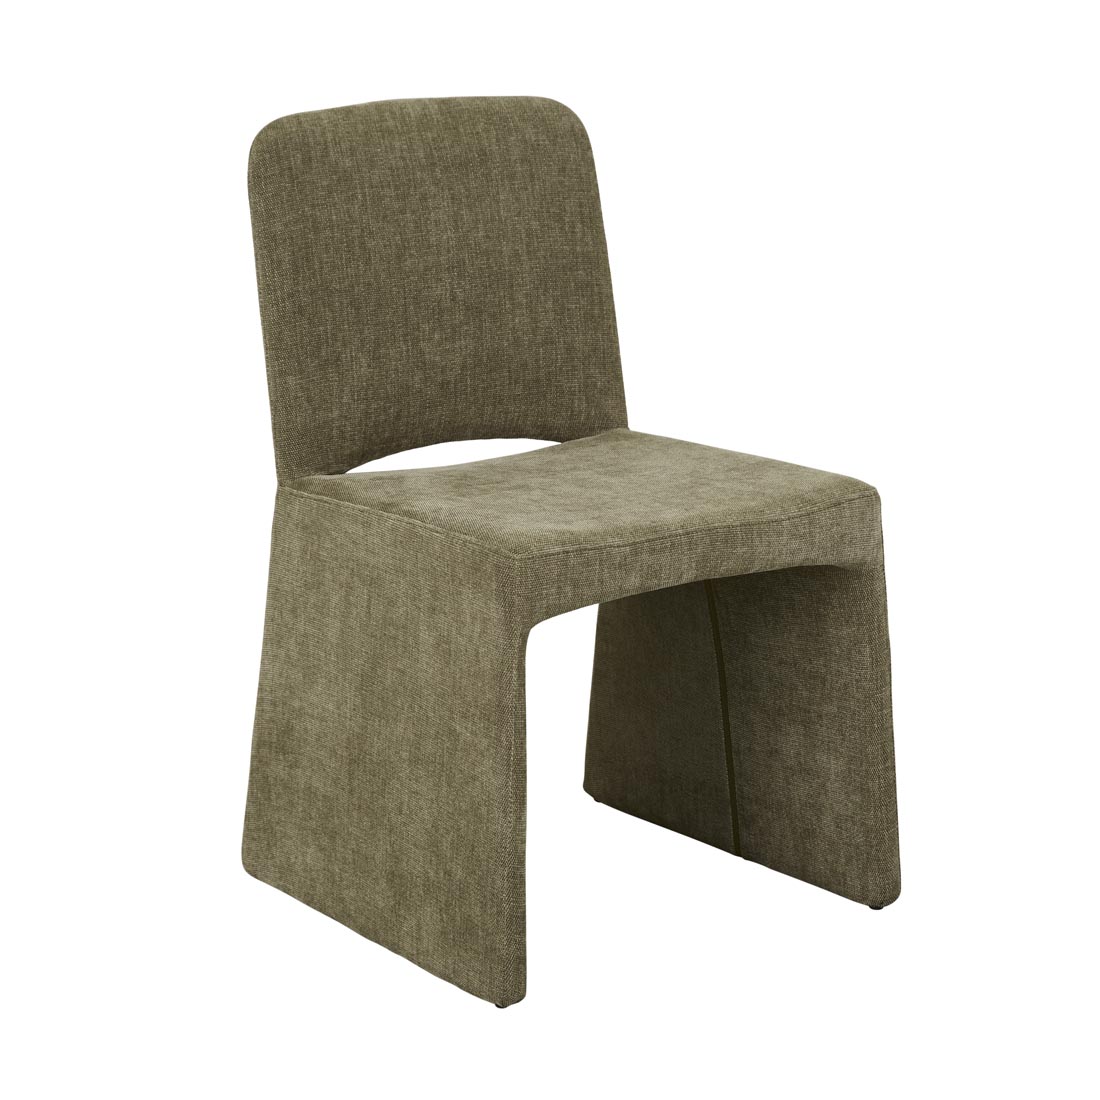 Clare Dining Chair image 21